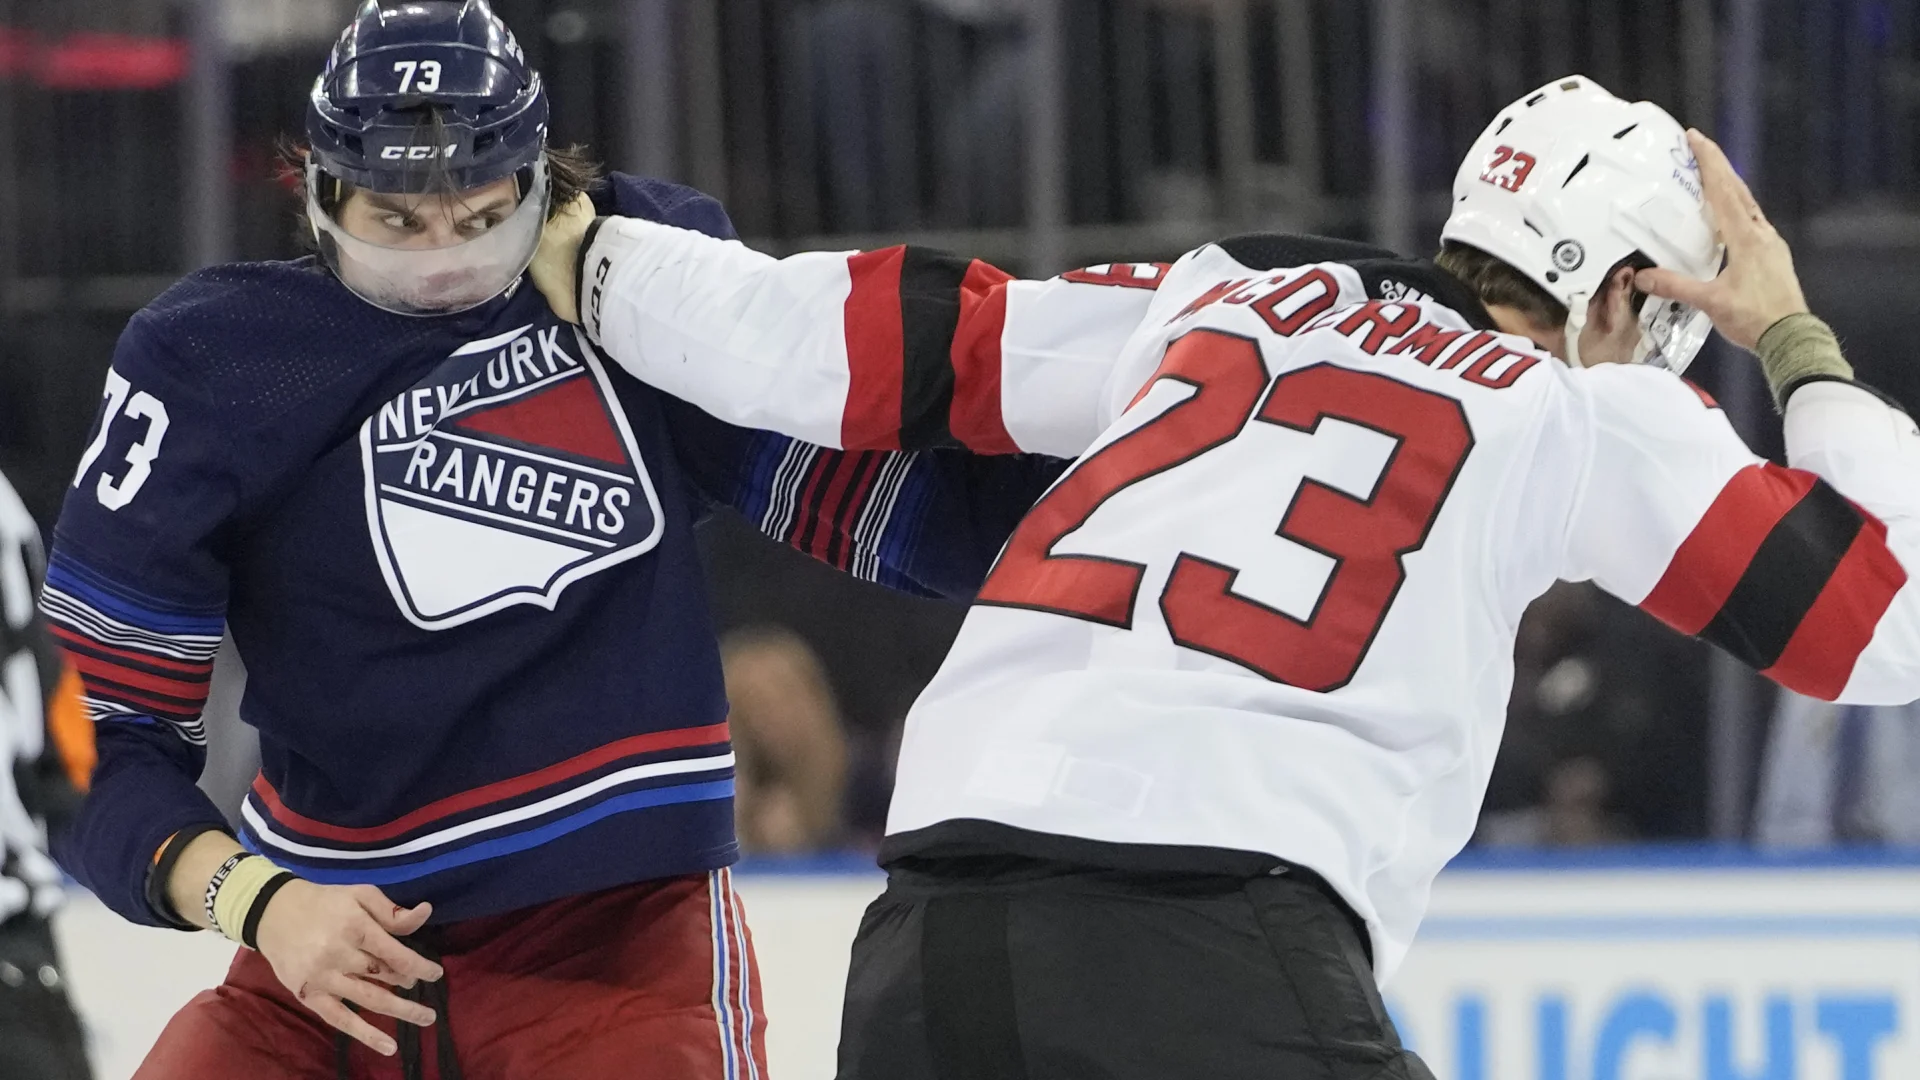 All 10 skaters brawl off opening faceoff at start of Devils-Rangers game